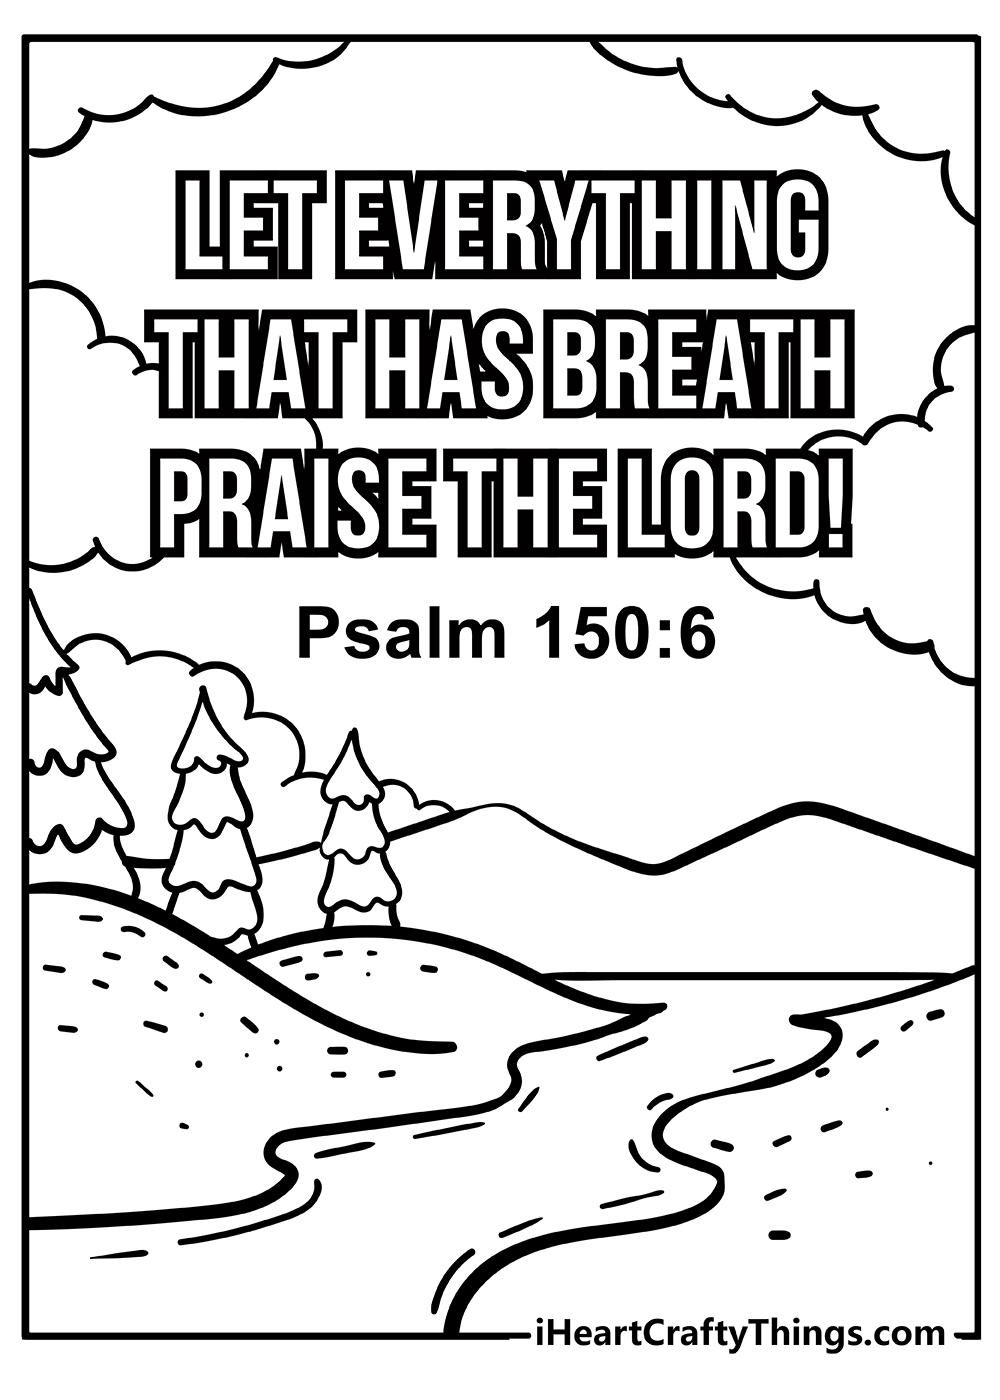 Bible Verse Coloring Sheet for children free download